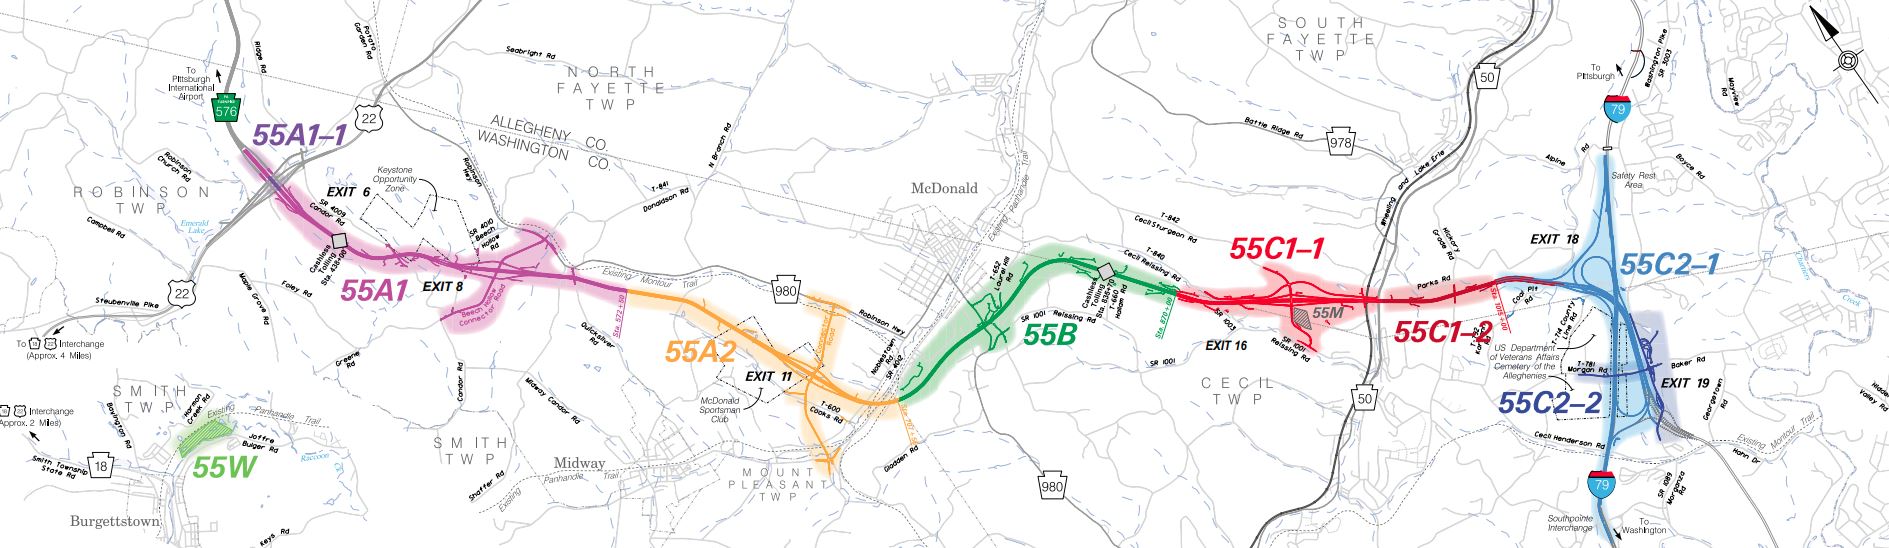 Southern Beltway project map